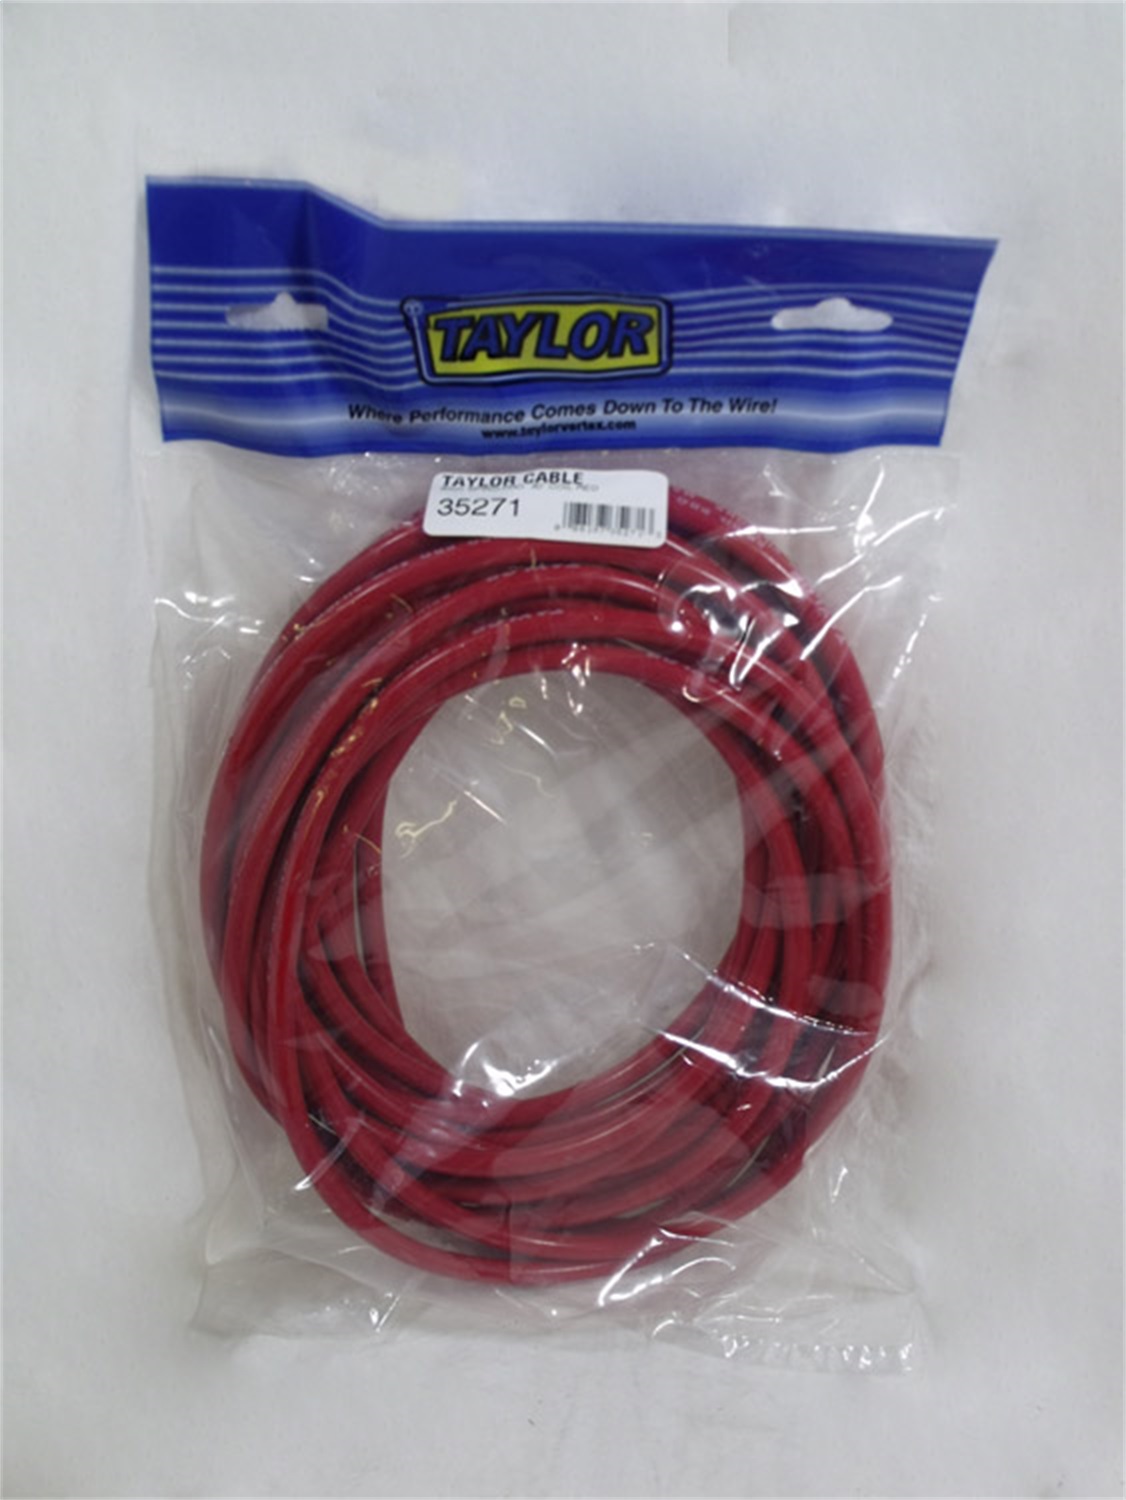 Taylor Cable Taylor Cable 35271 8mm Spiro Wound; Ignition Wire